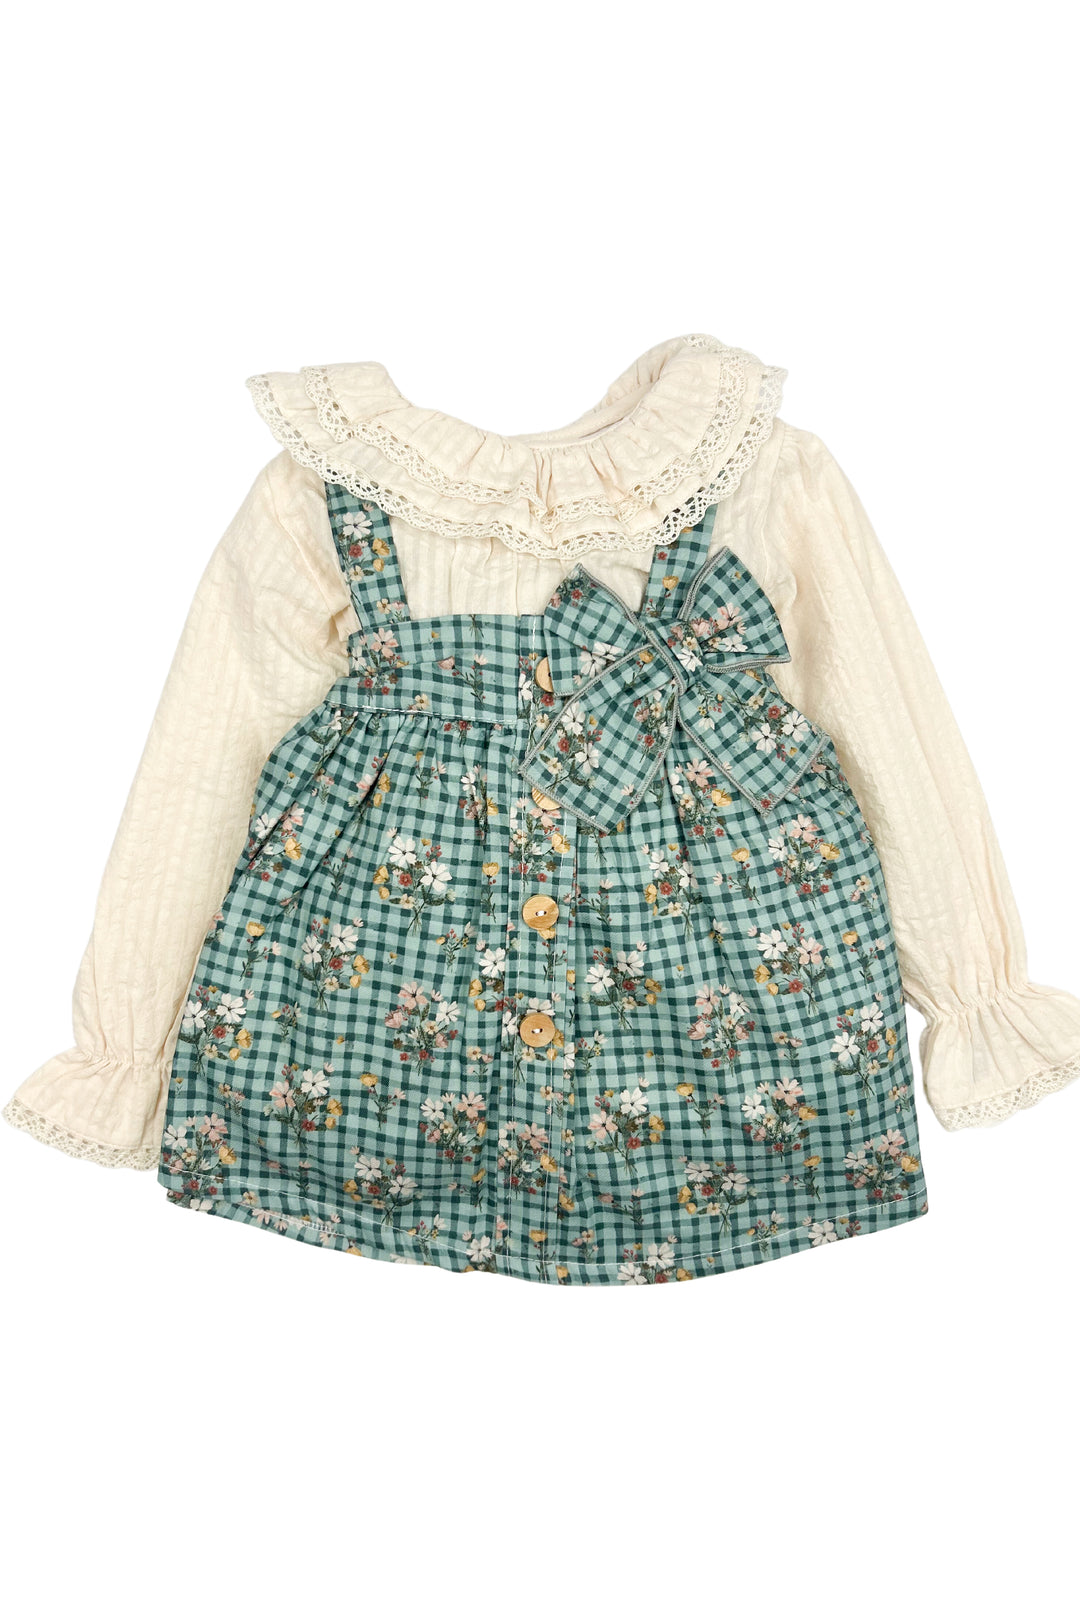 Valentina Bebes "Lucy" Blouse & Teal Gingham Pinafore Dress | Millie and John